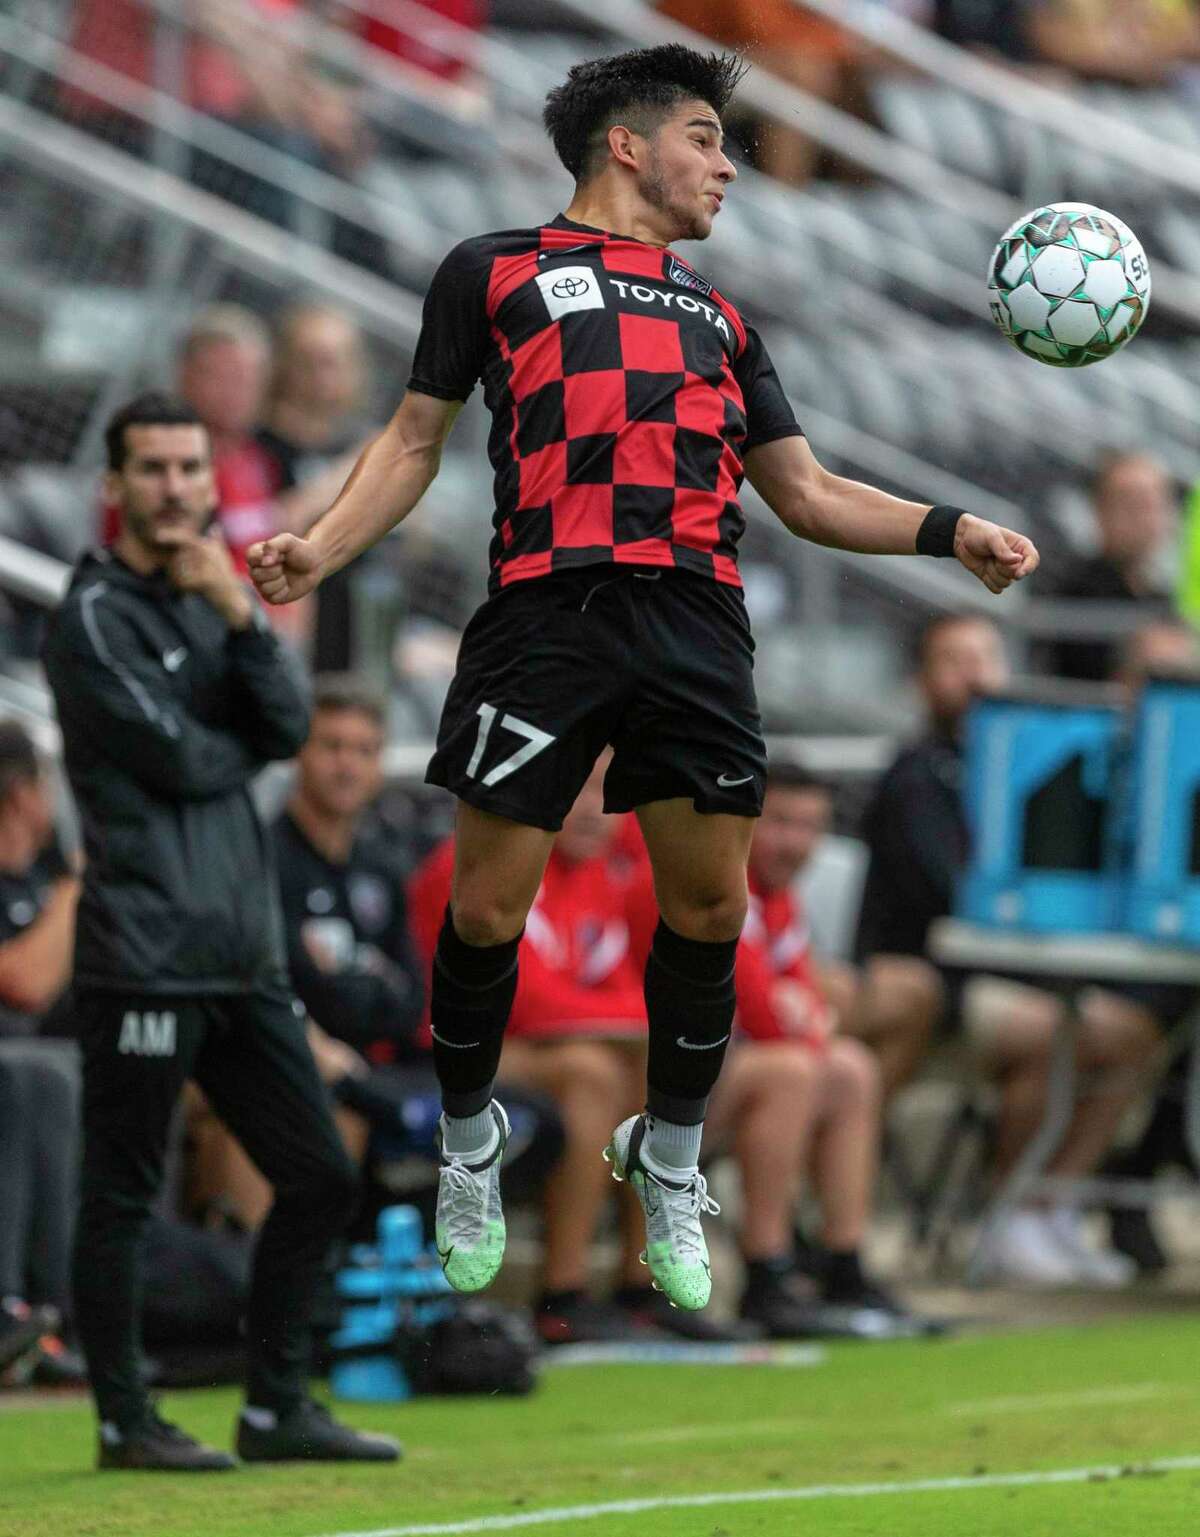 San Antonio FC's Jose Gallegos heads the ball Friday evening, July 9, 2021 at Toyota Field during the team's match against UNAM Puma.